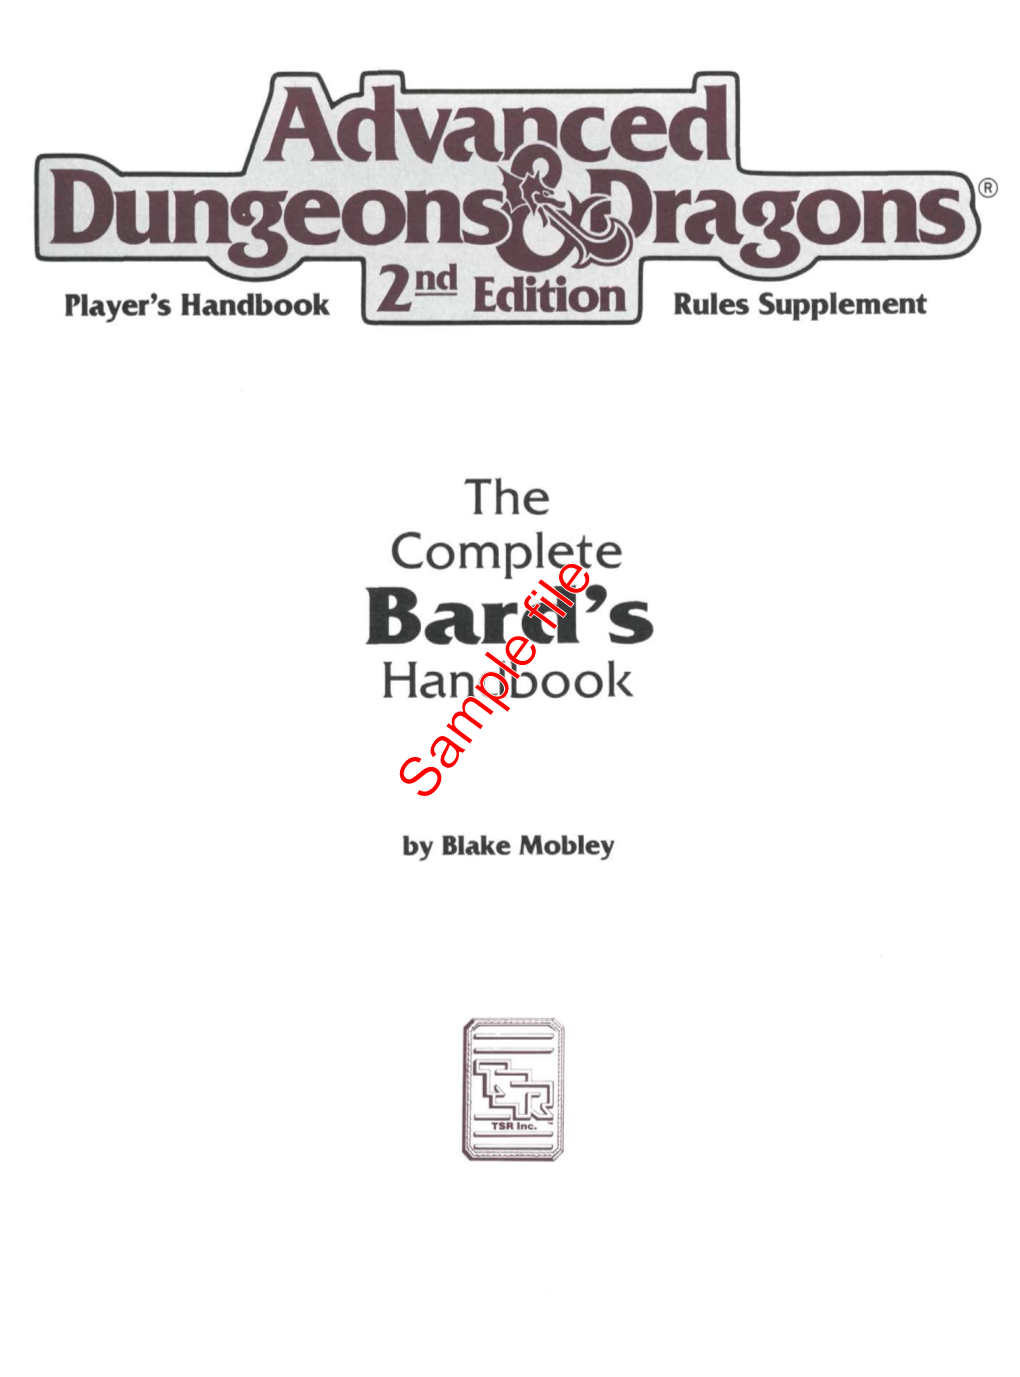 The Completed Bard's Handbook